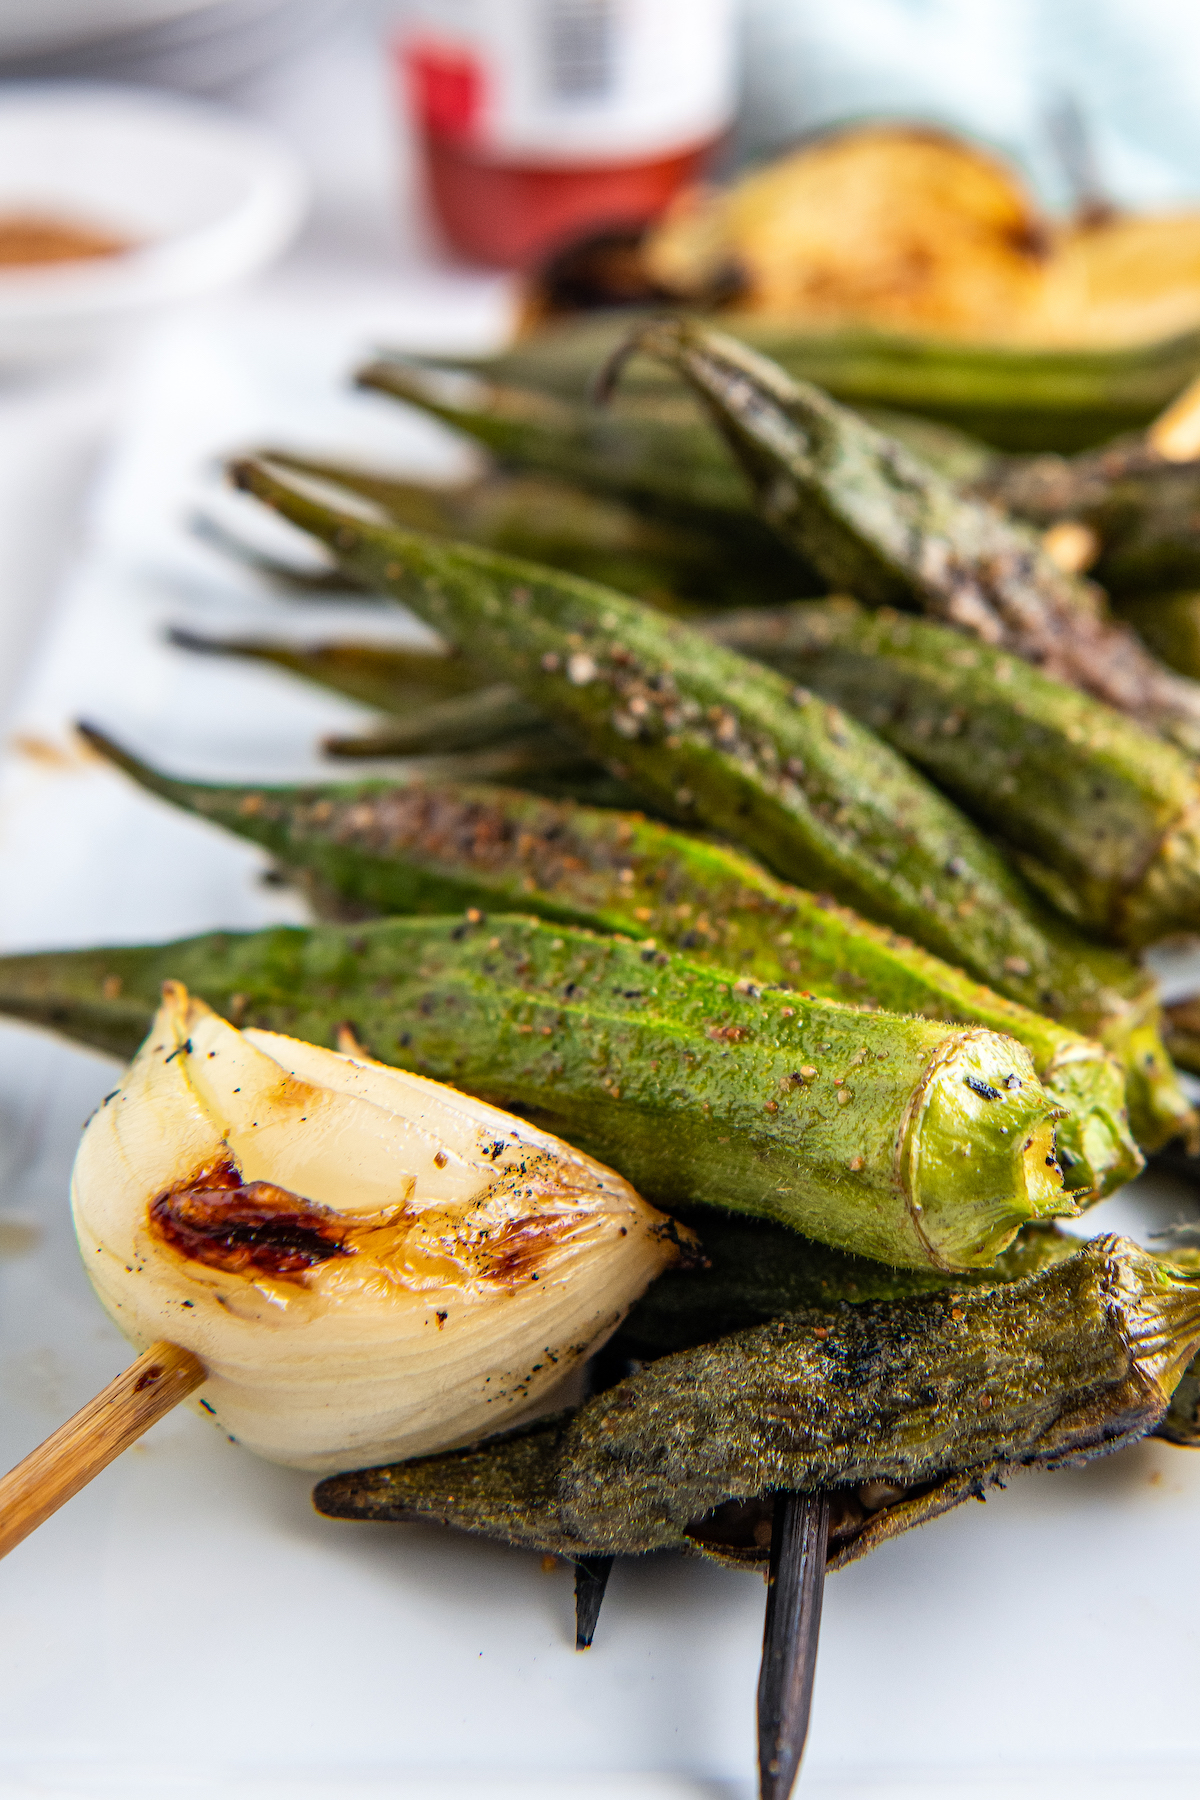 up close picture of okra and onion grilled on a skewer. the food is done and a little charred 